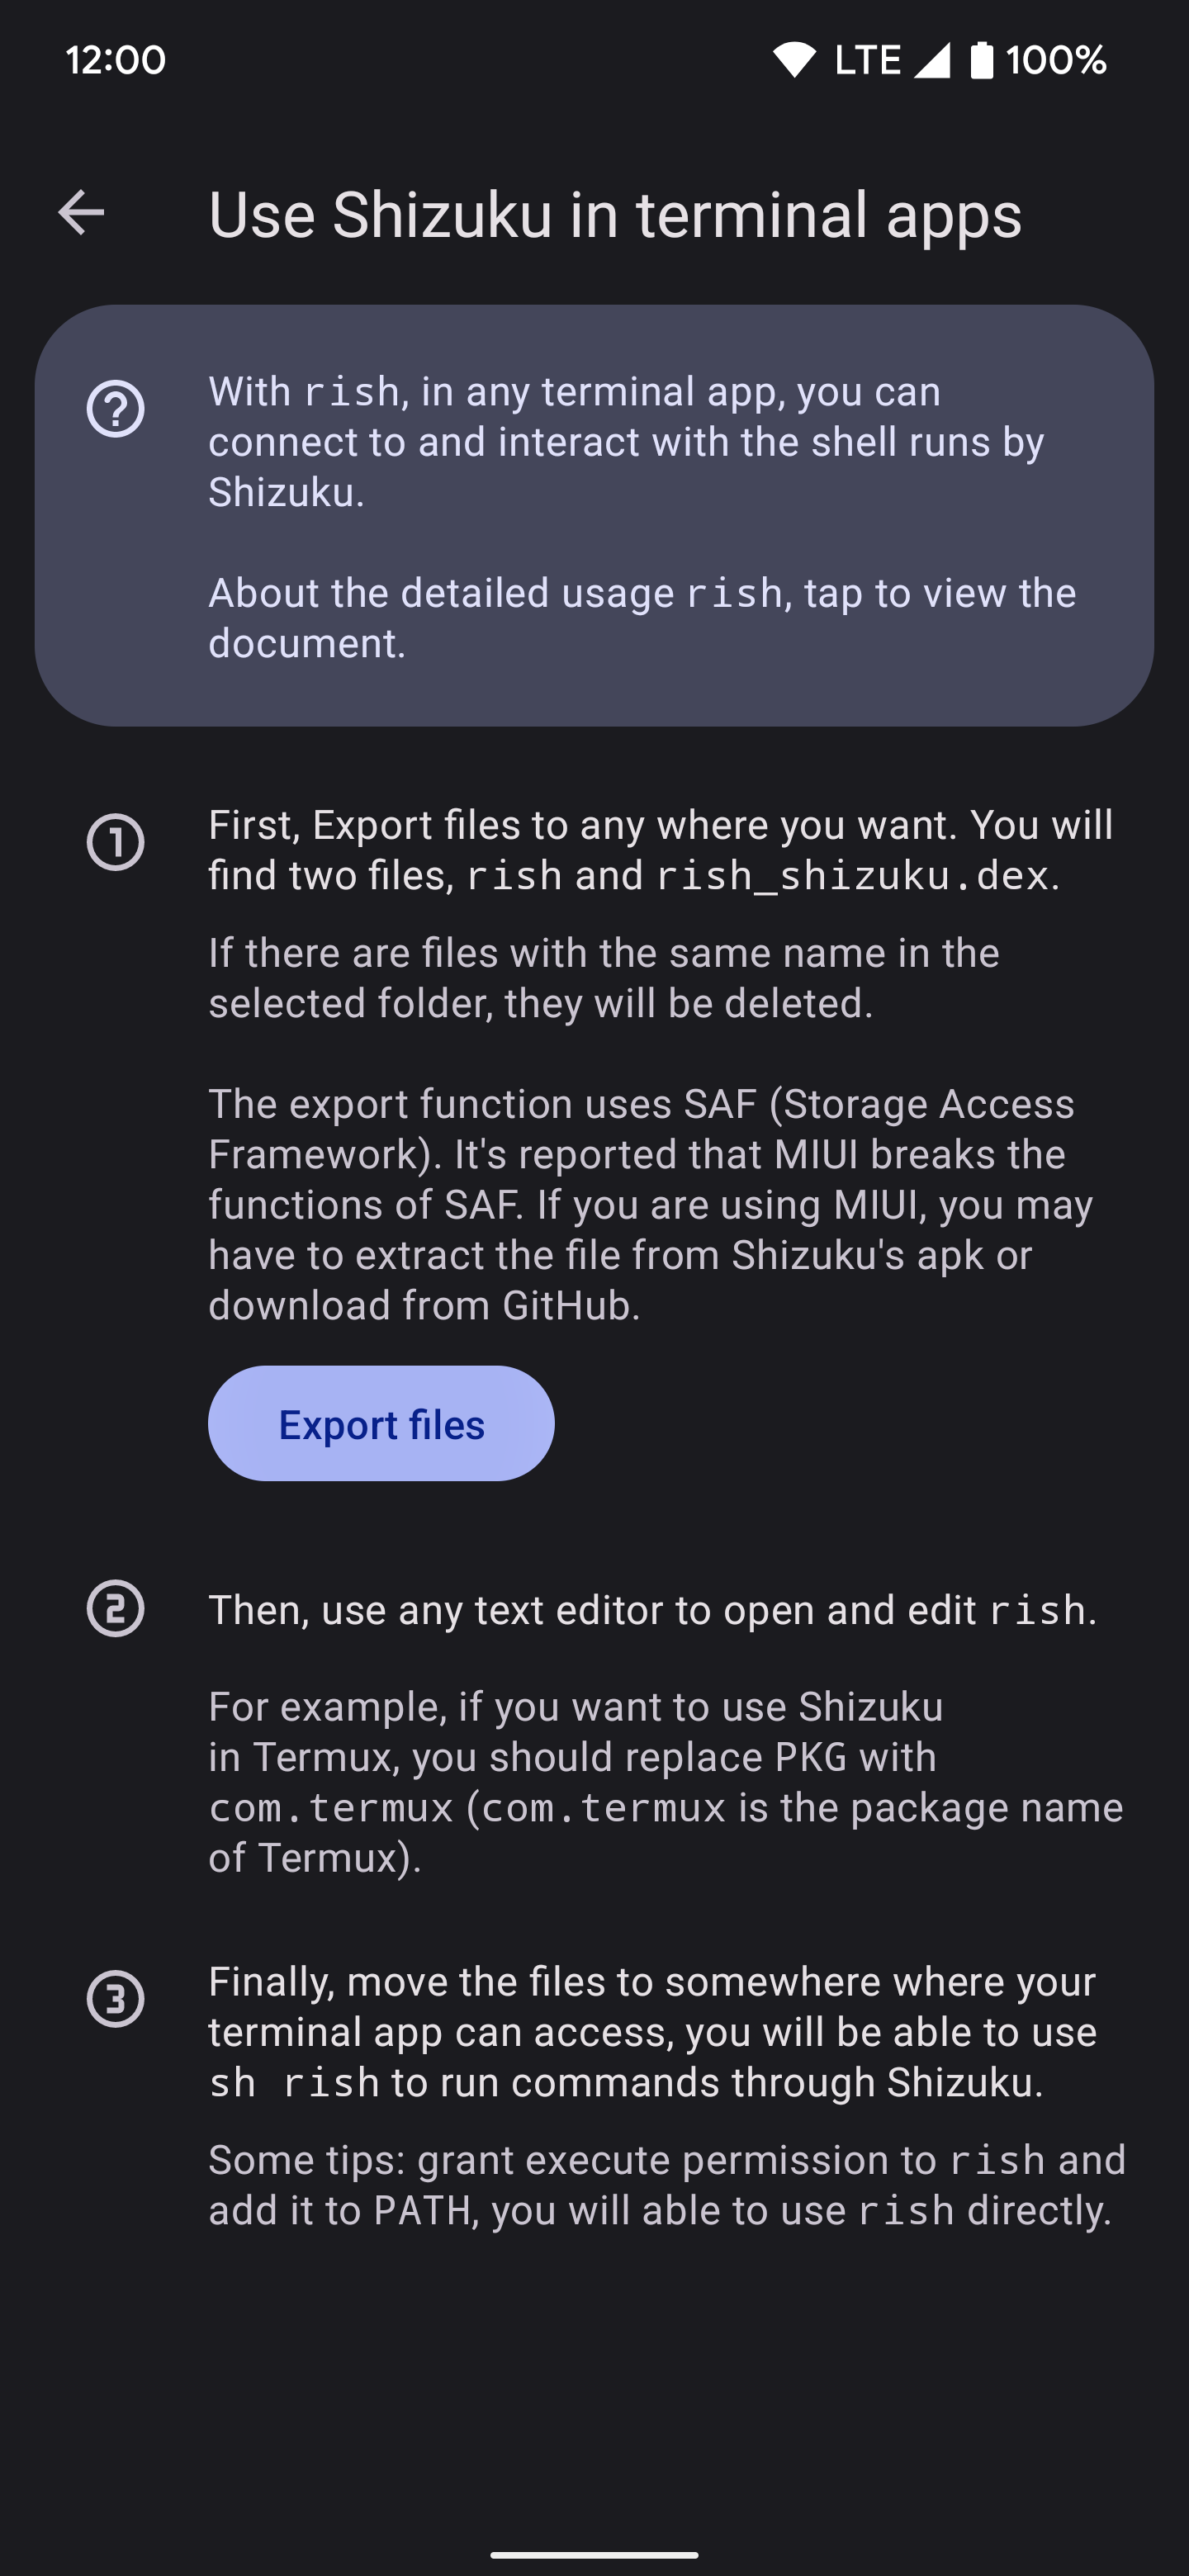 Showing the Export files button for Shizuku terminal apps.